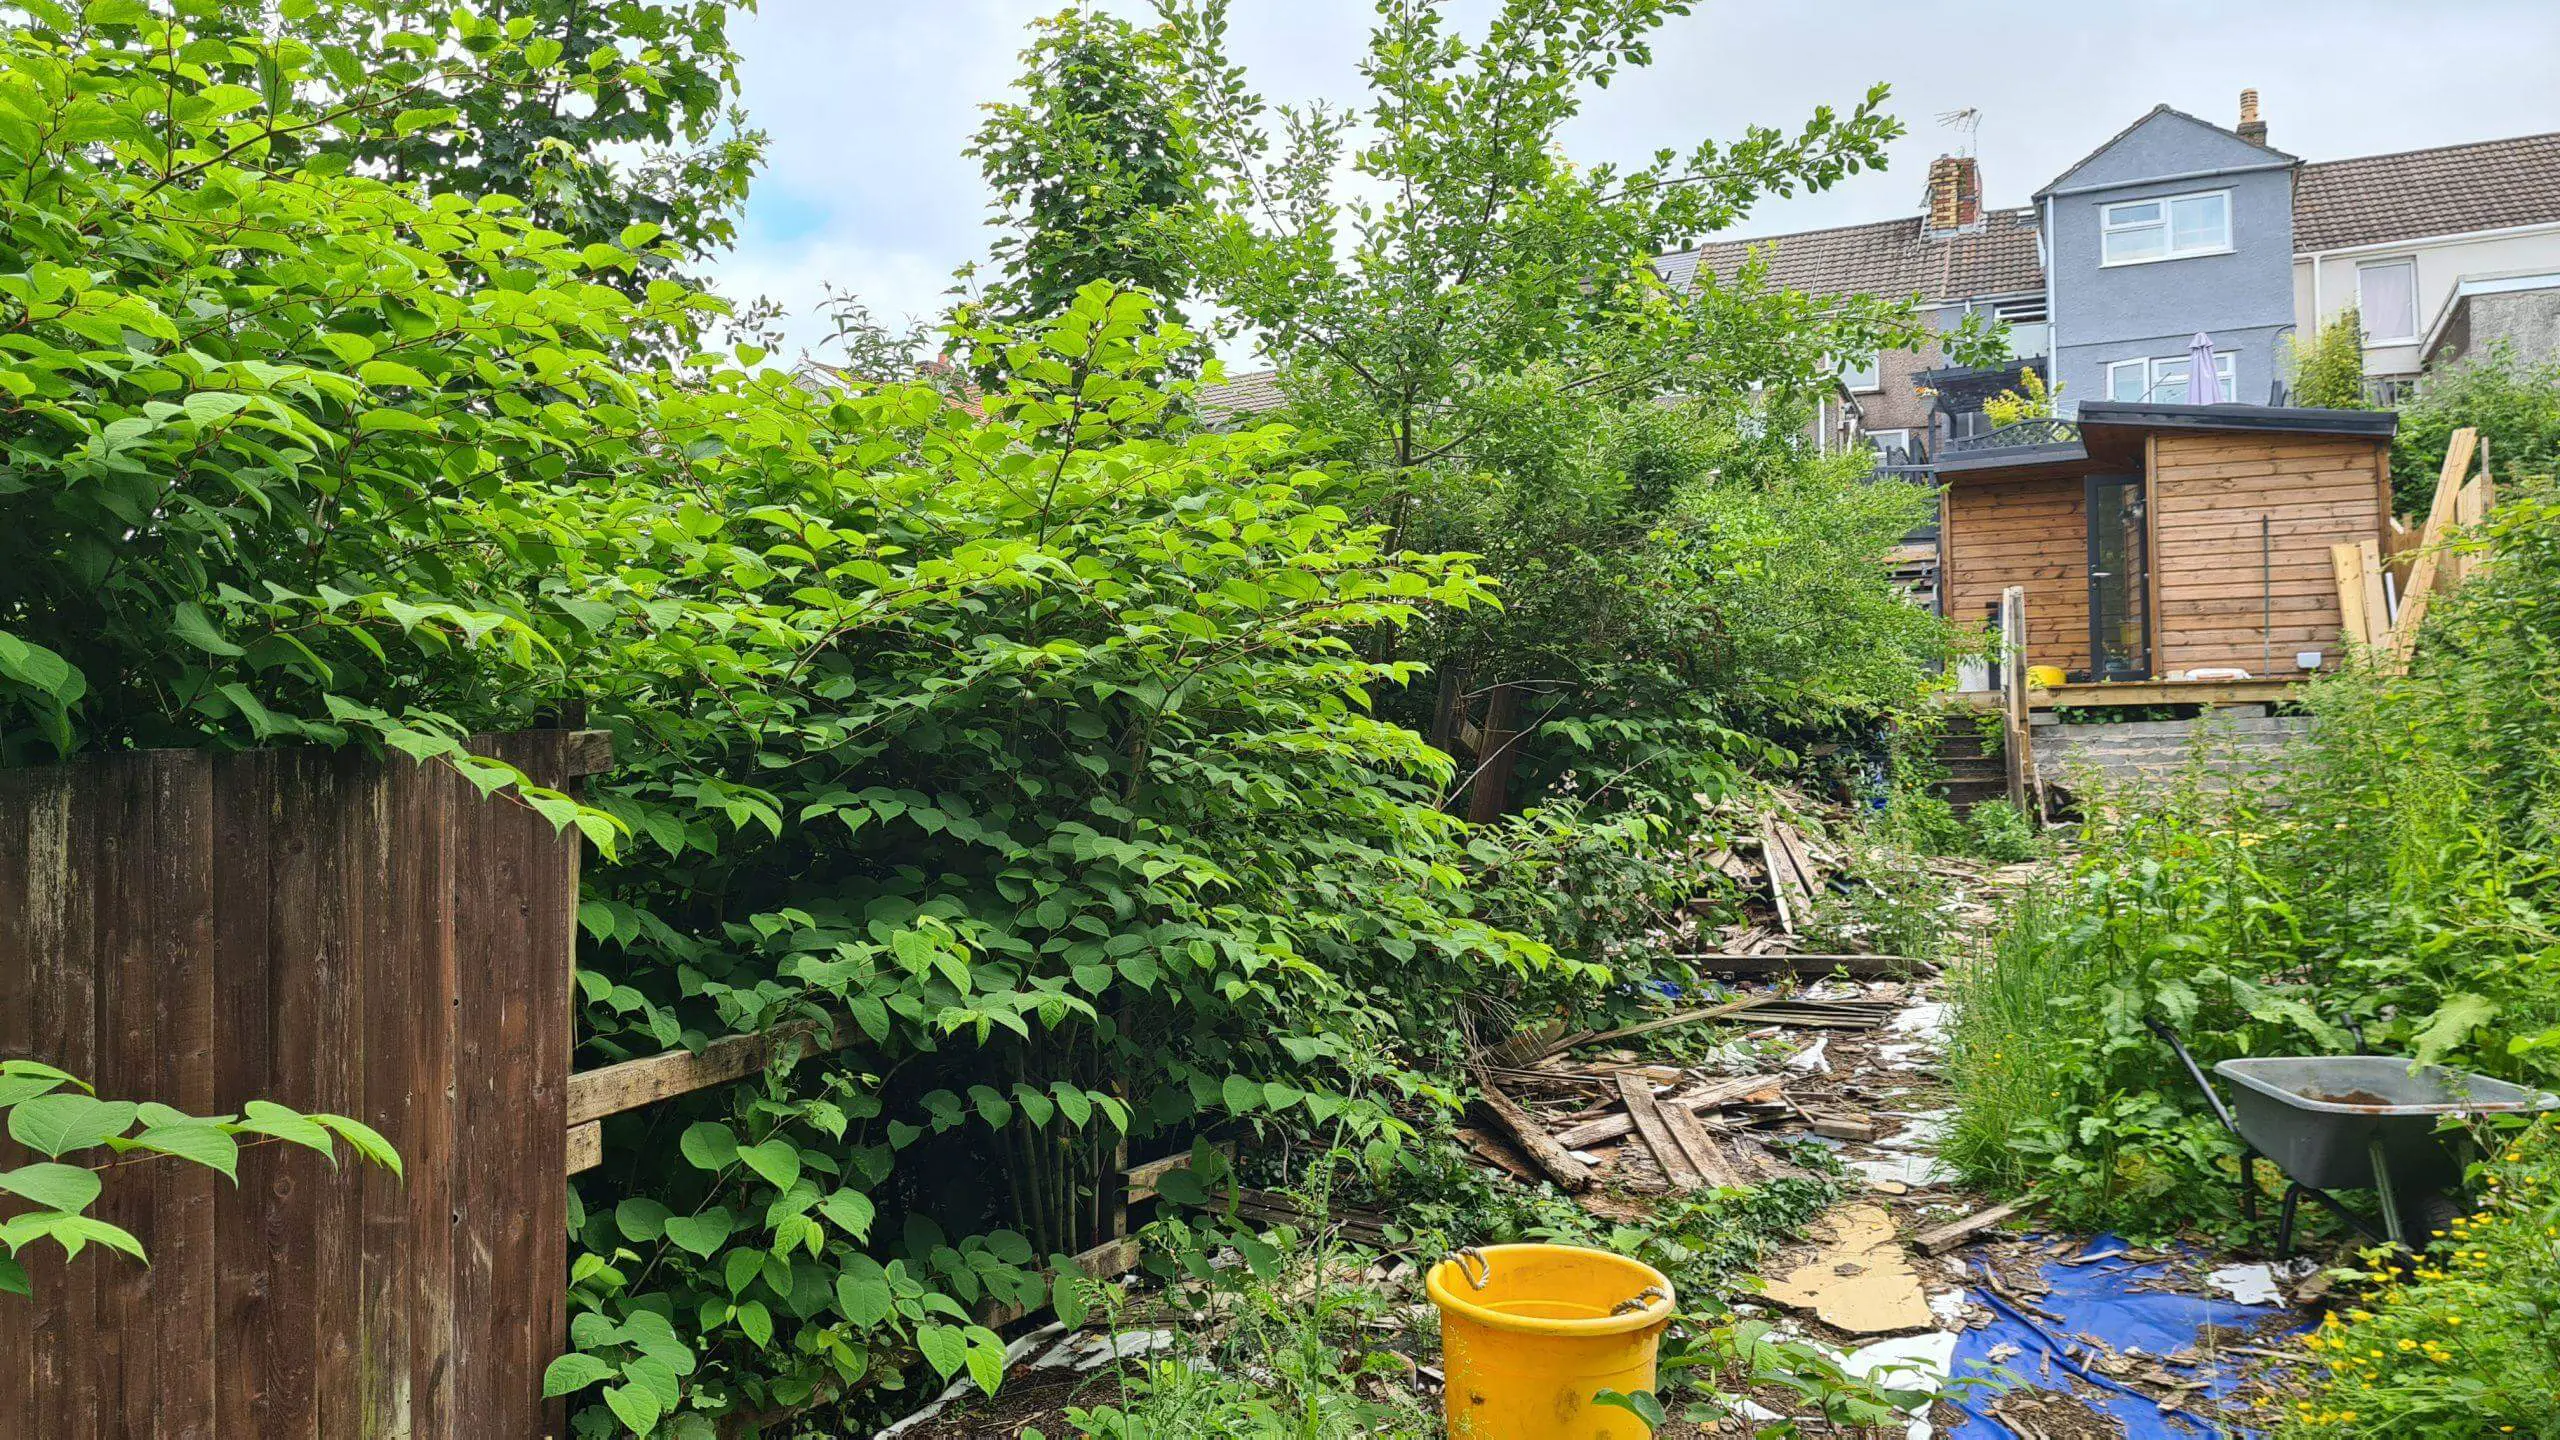 Japanese knotweed growing from one property to the next which can cause arguements between neighbours and legal disputes